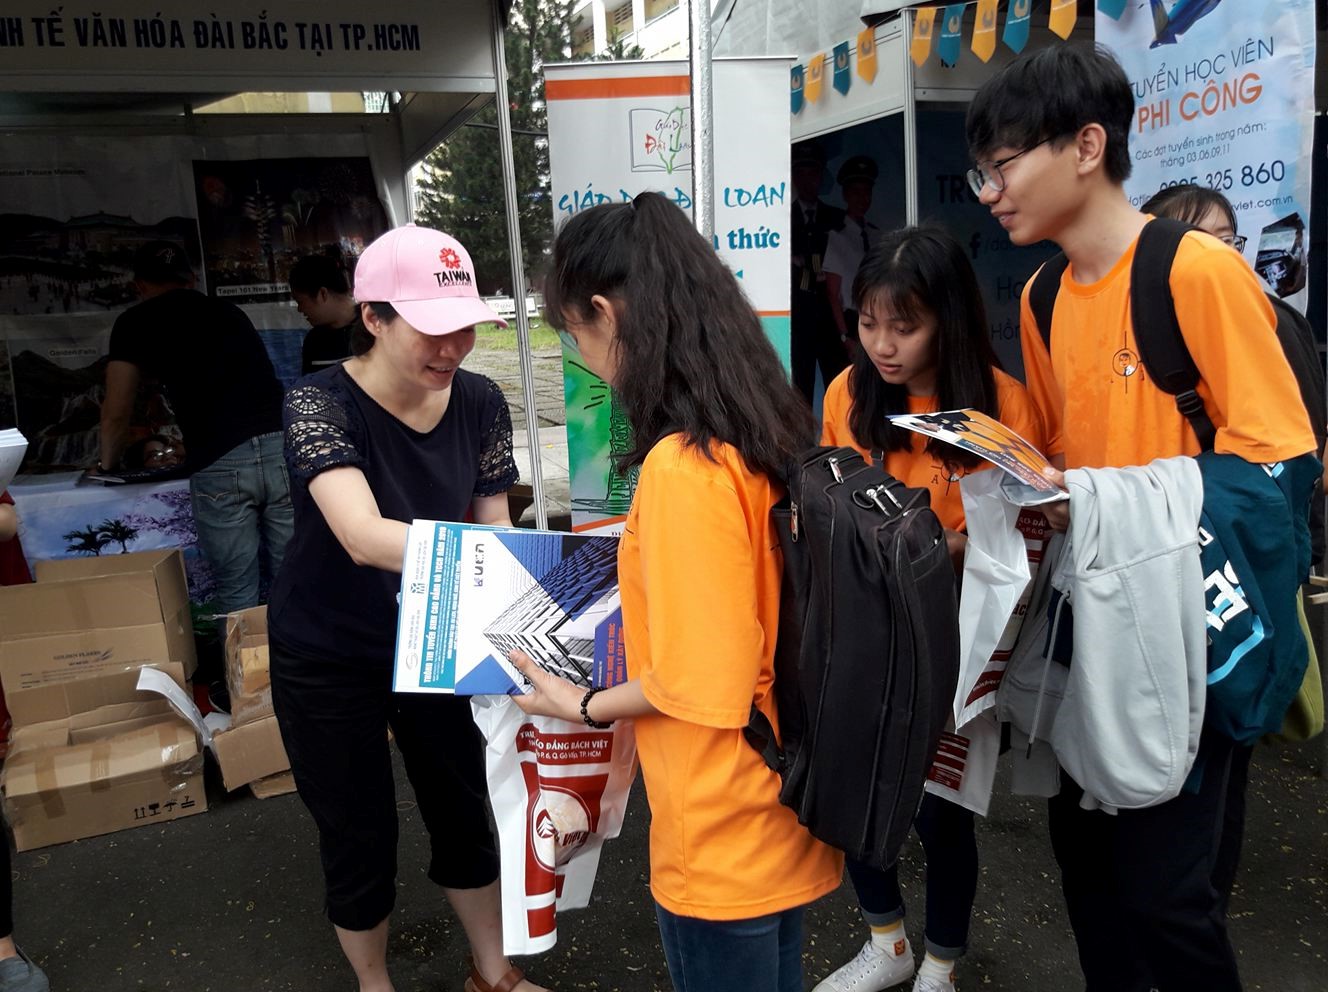 Education Division of the Taipei Economic and Cultural Office in Ho Chi Minh City promotes Education in Taiwan on Student Recruitment Day